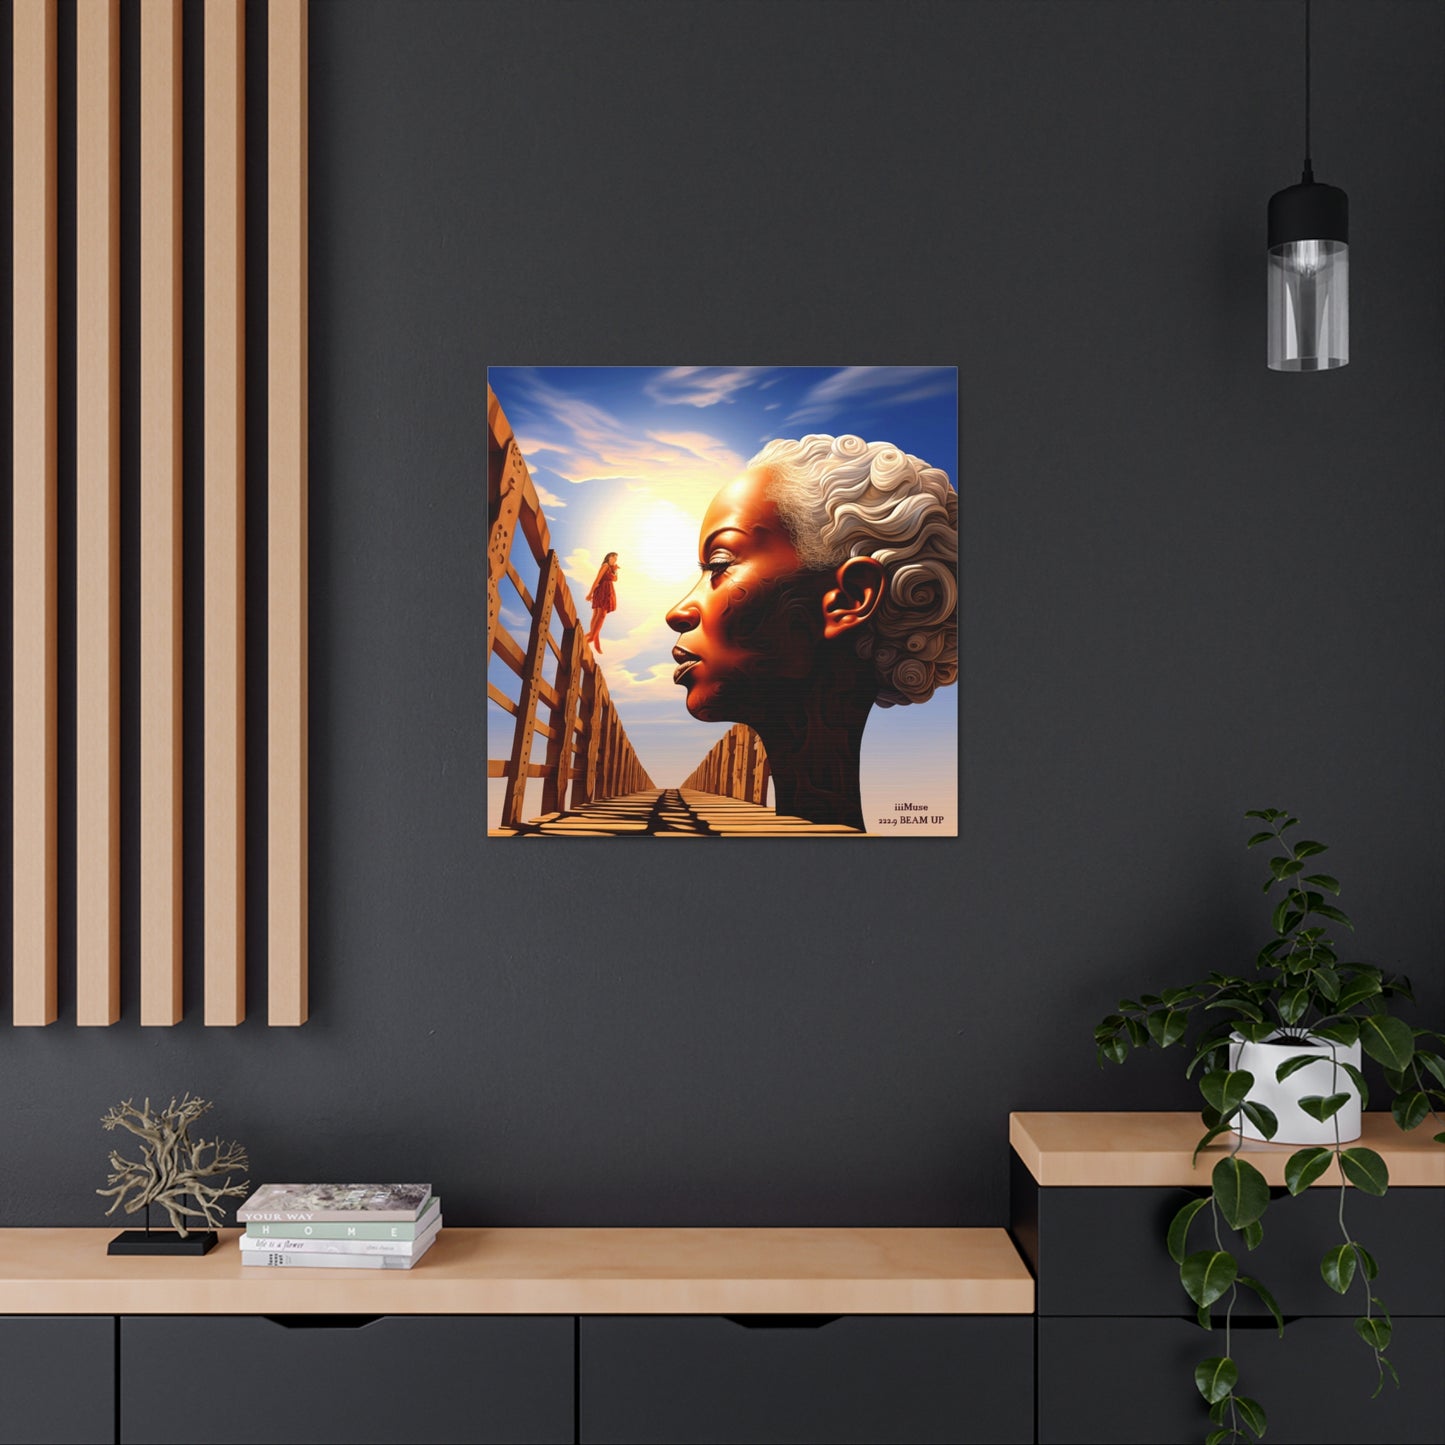 Wisdom is the Bridge to the Youth - A Gallery Canvas